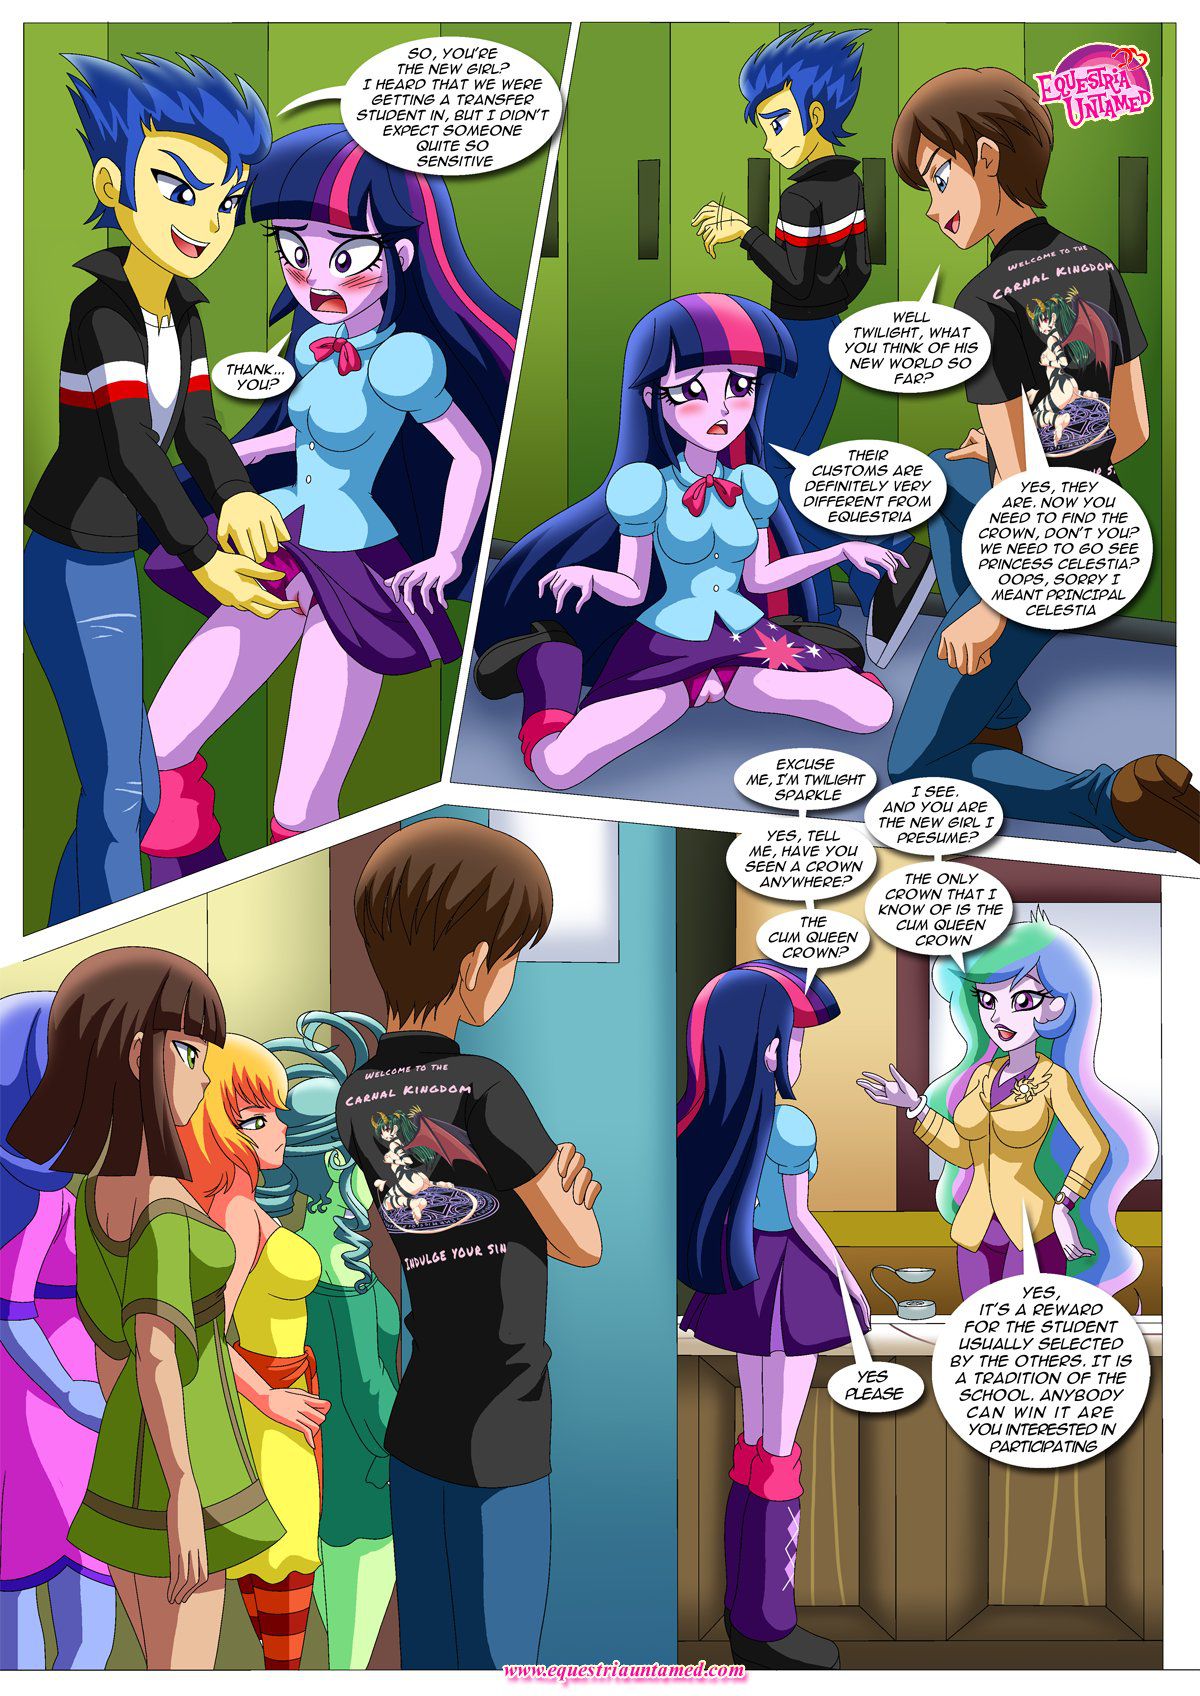 [Palcomix] Equestria Girls Unleashed (My Little Pony Friendship is Magic) [Ongoing] 4